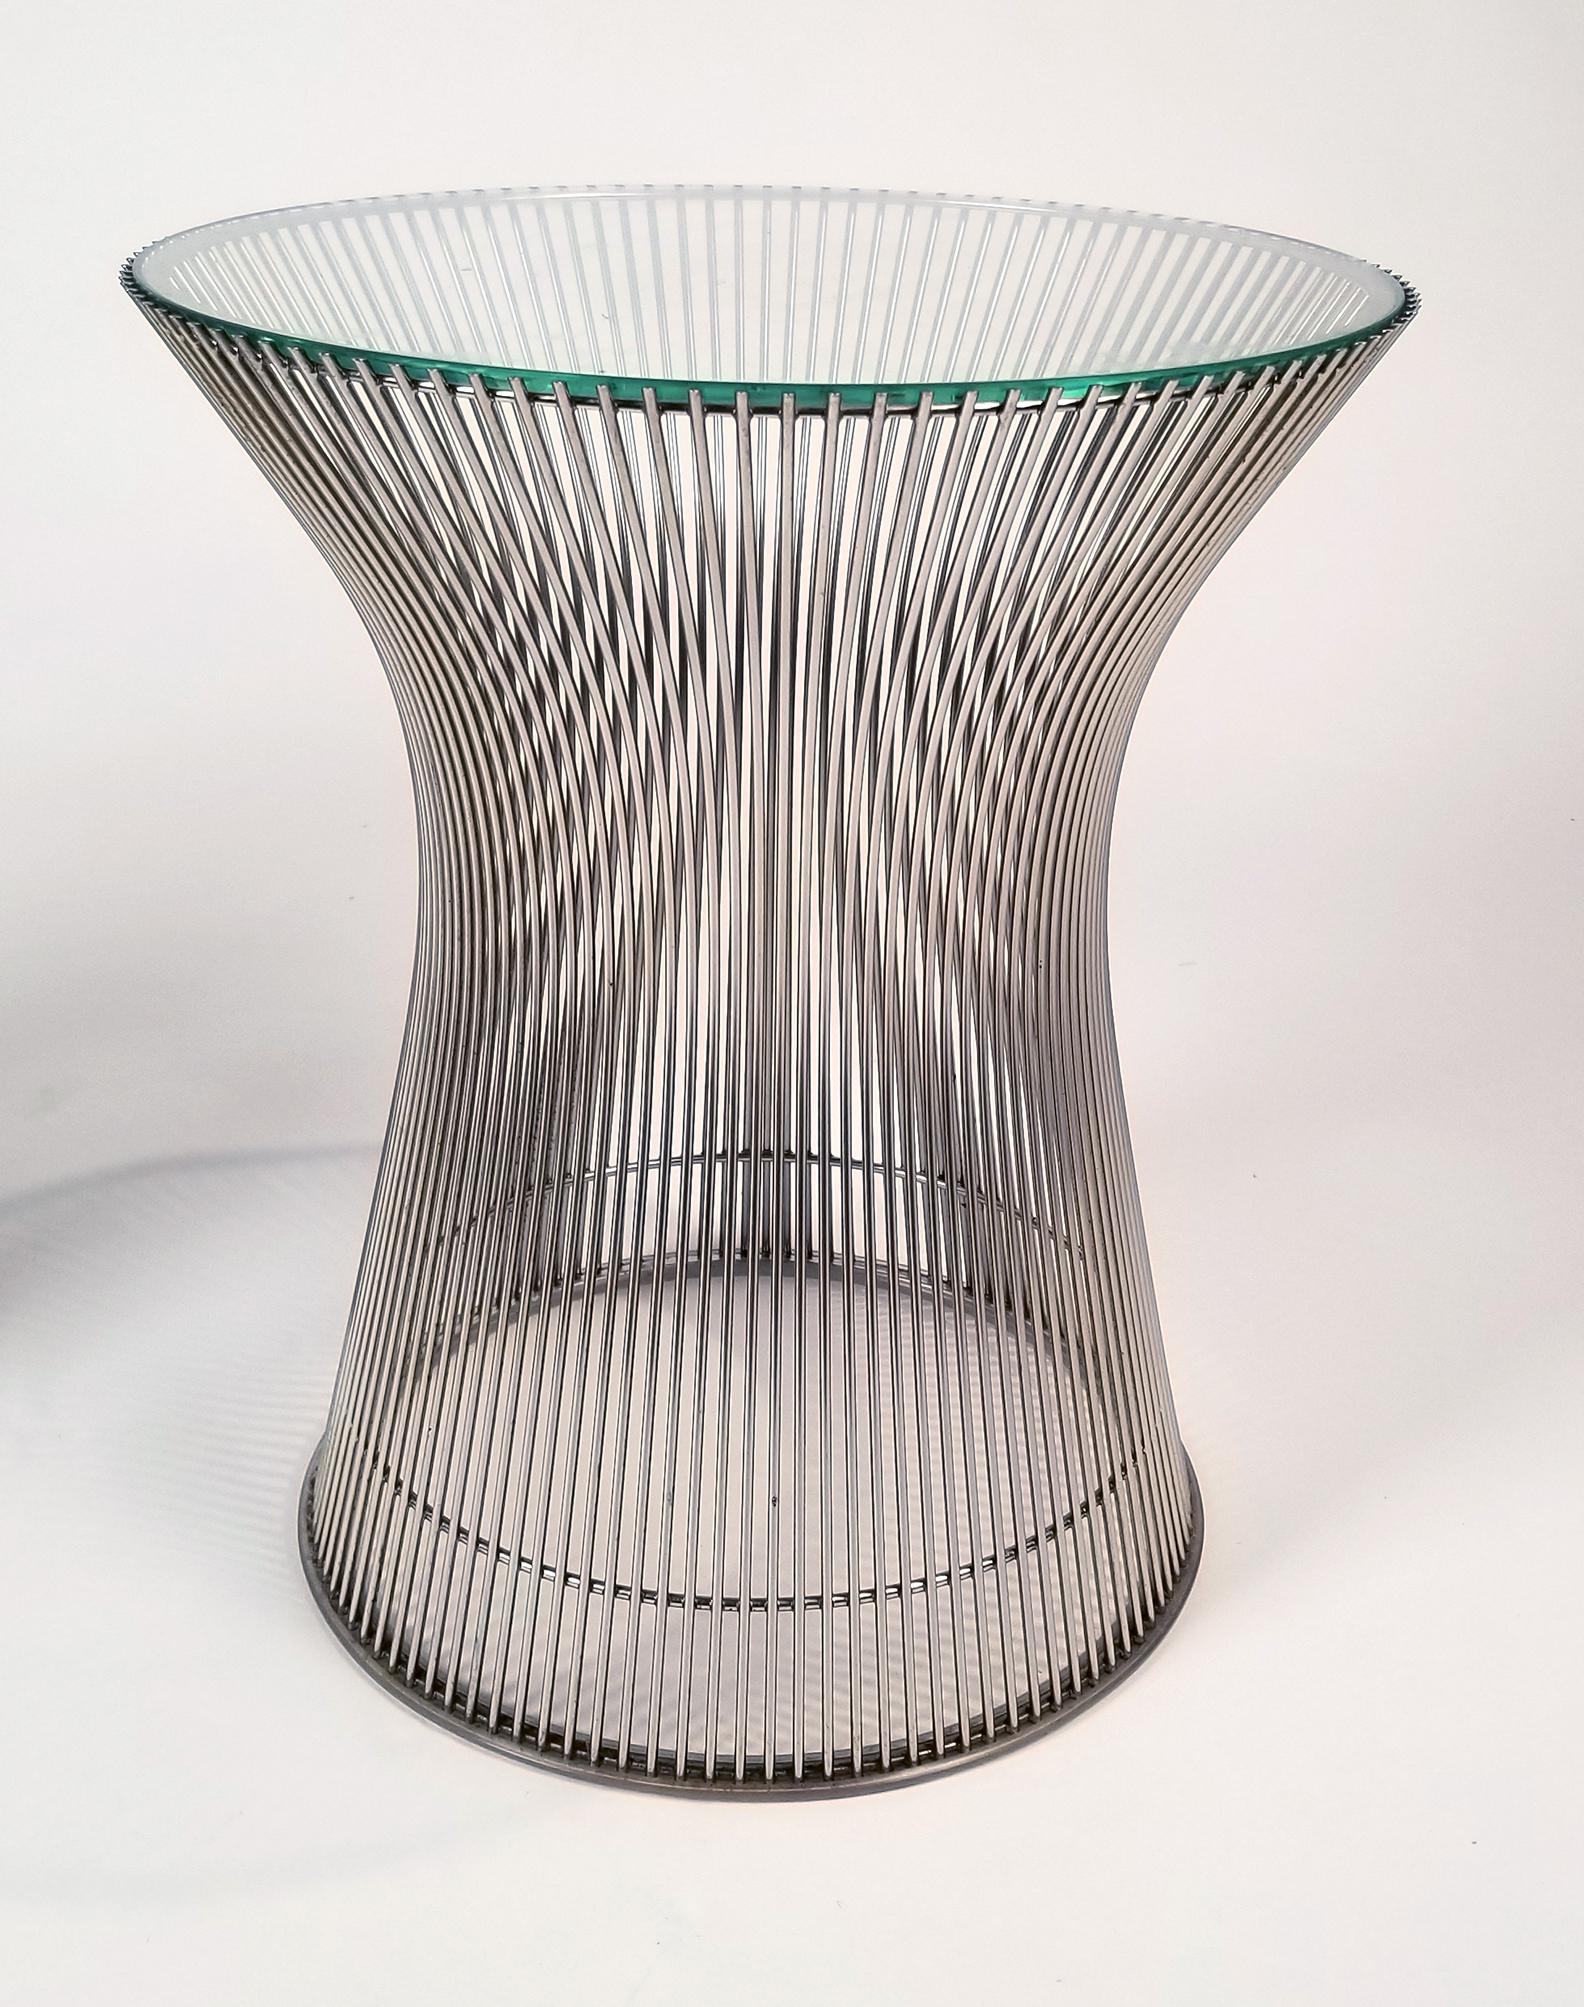 American Early Side Tables Designed by Warren Platner for Knoll